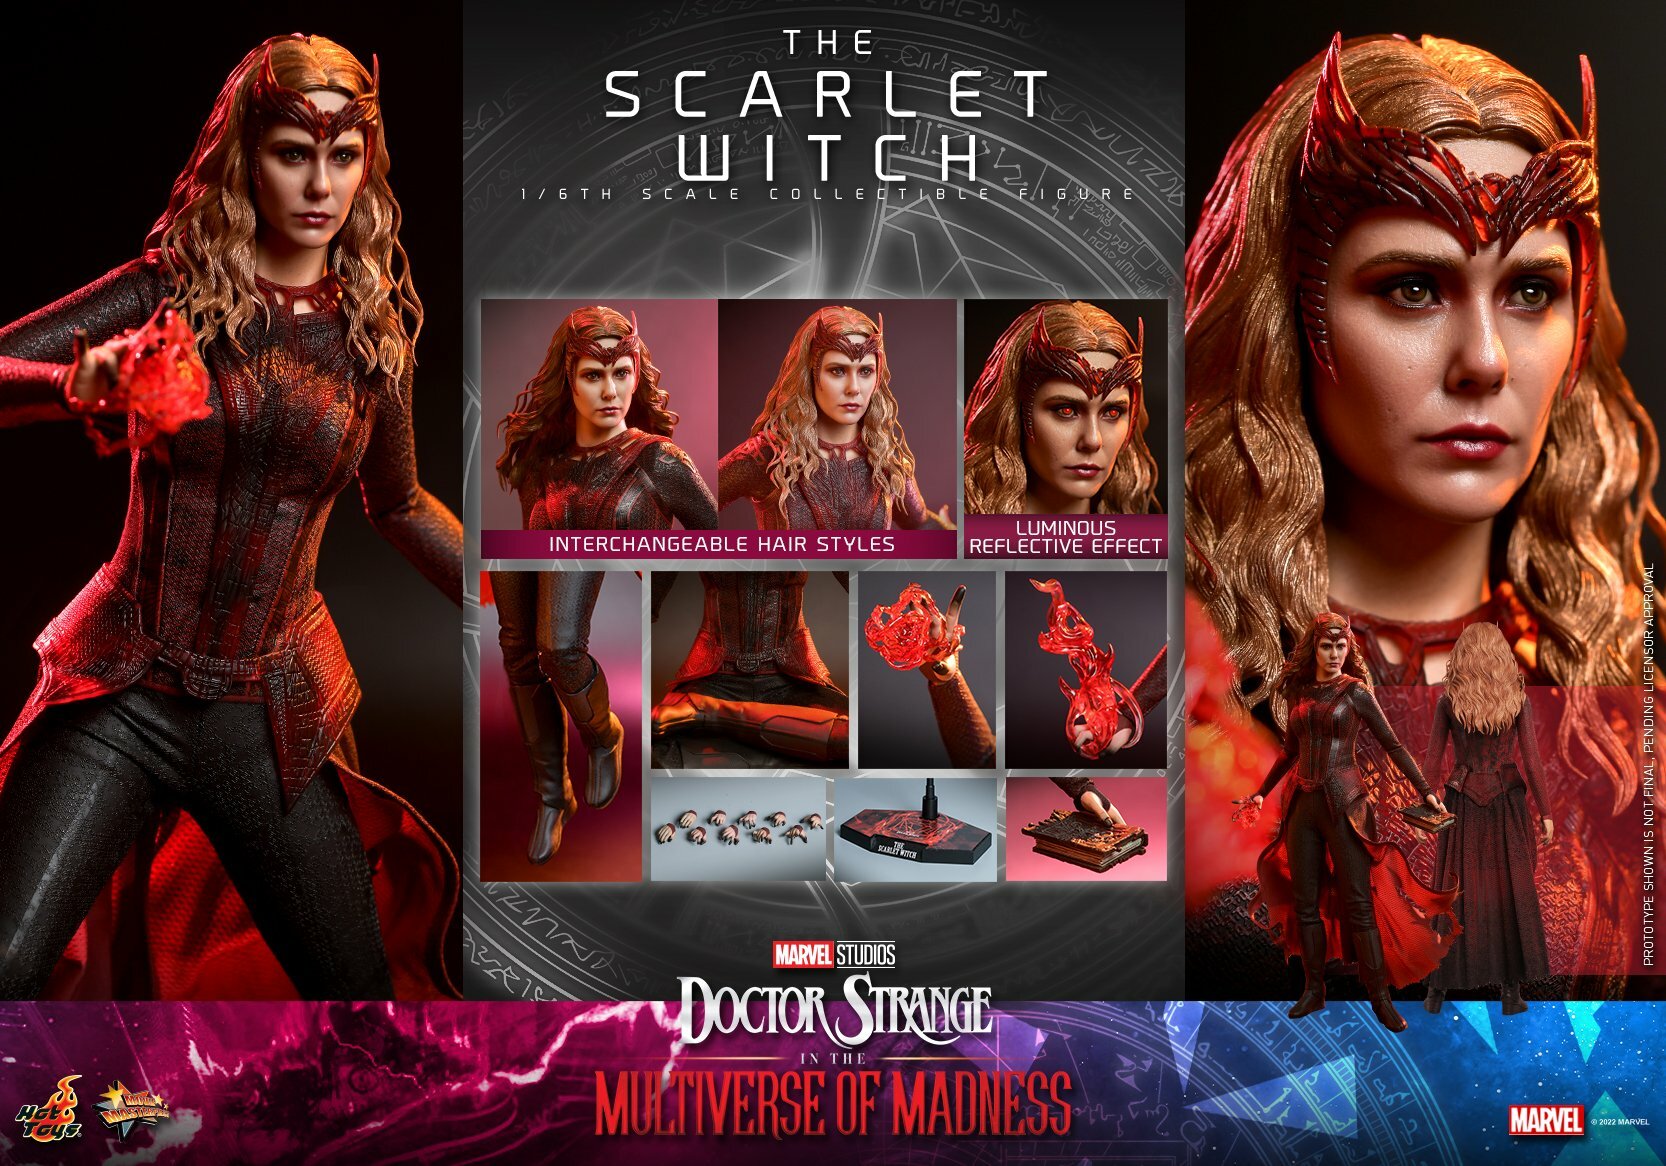 Hot-Toy-Multiverse-of-Madness-Scarlet-Witch-014.jpg.7f817f6d42fc9144dc93523742eac070.jpg